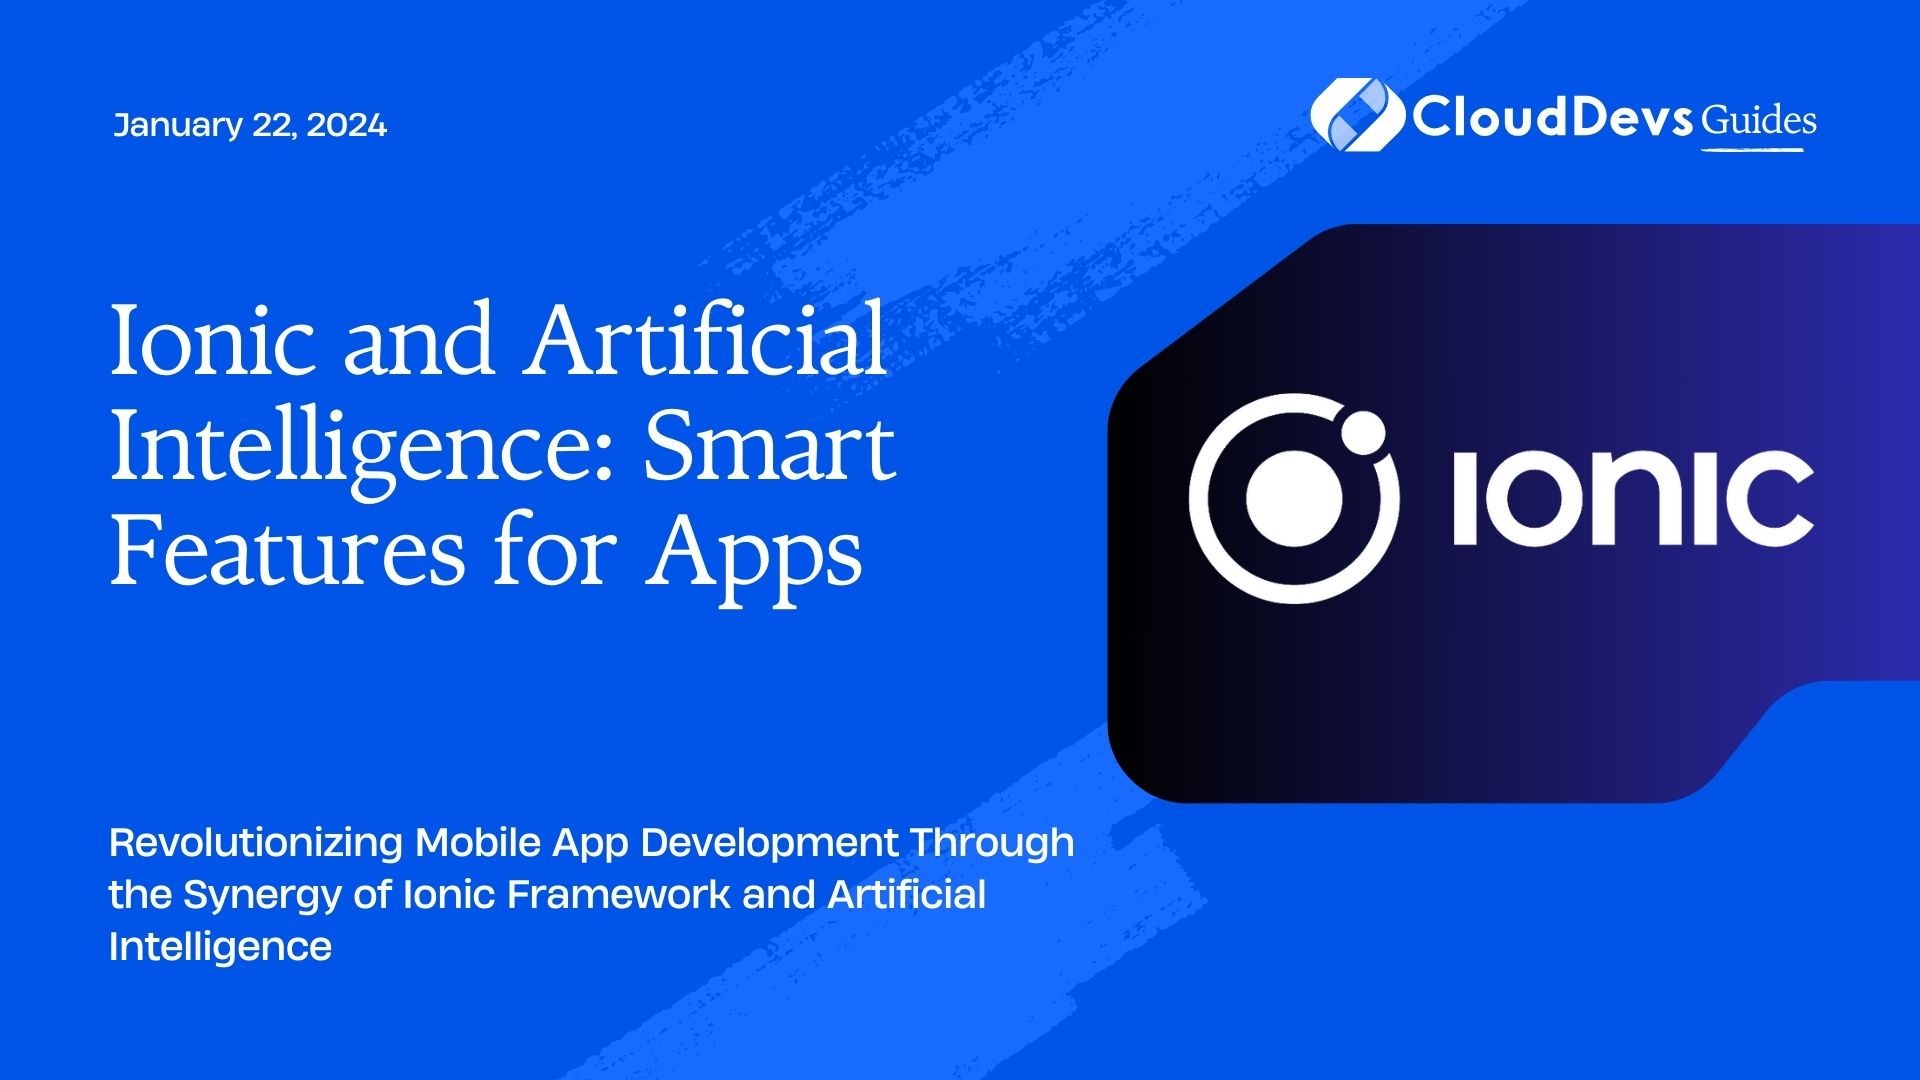 Ionic and Artificial Intelligence: Smart Features for Apps